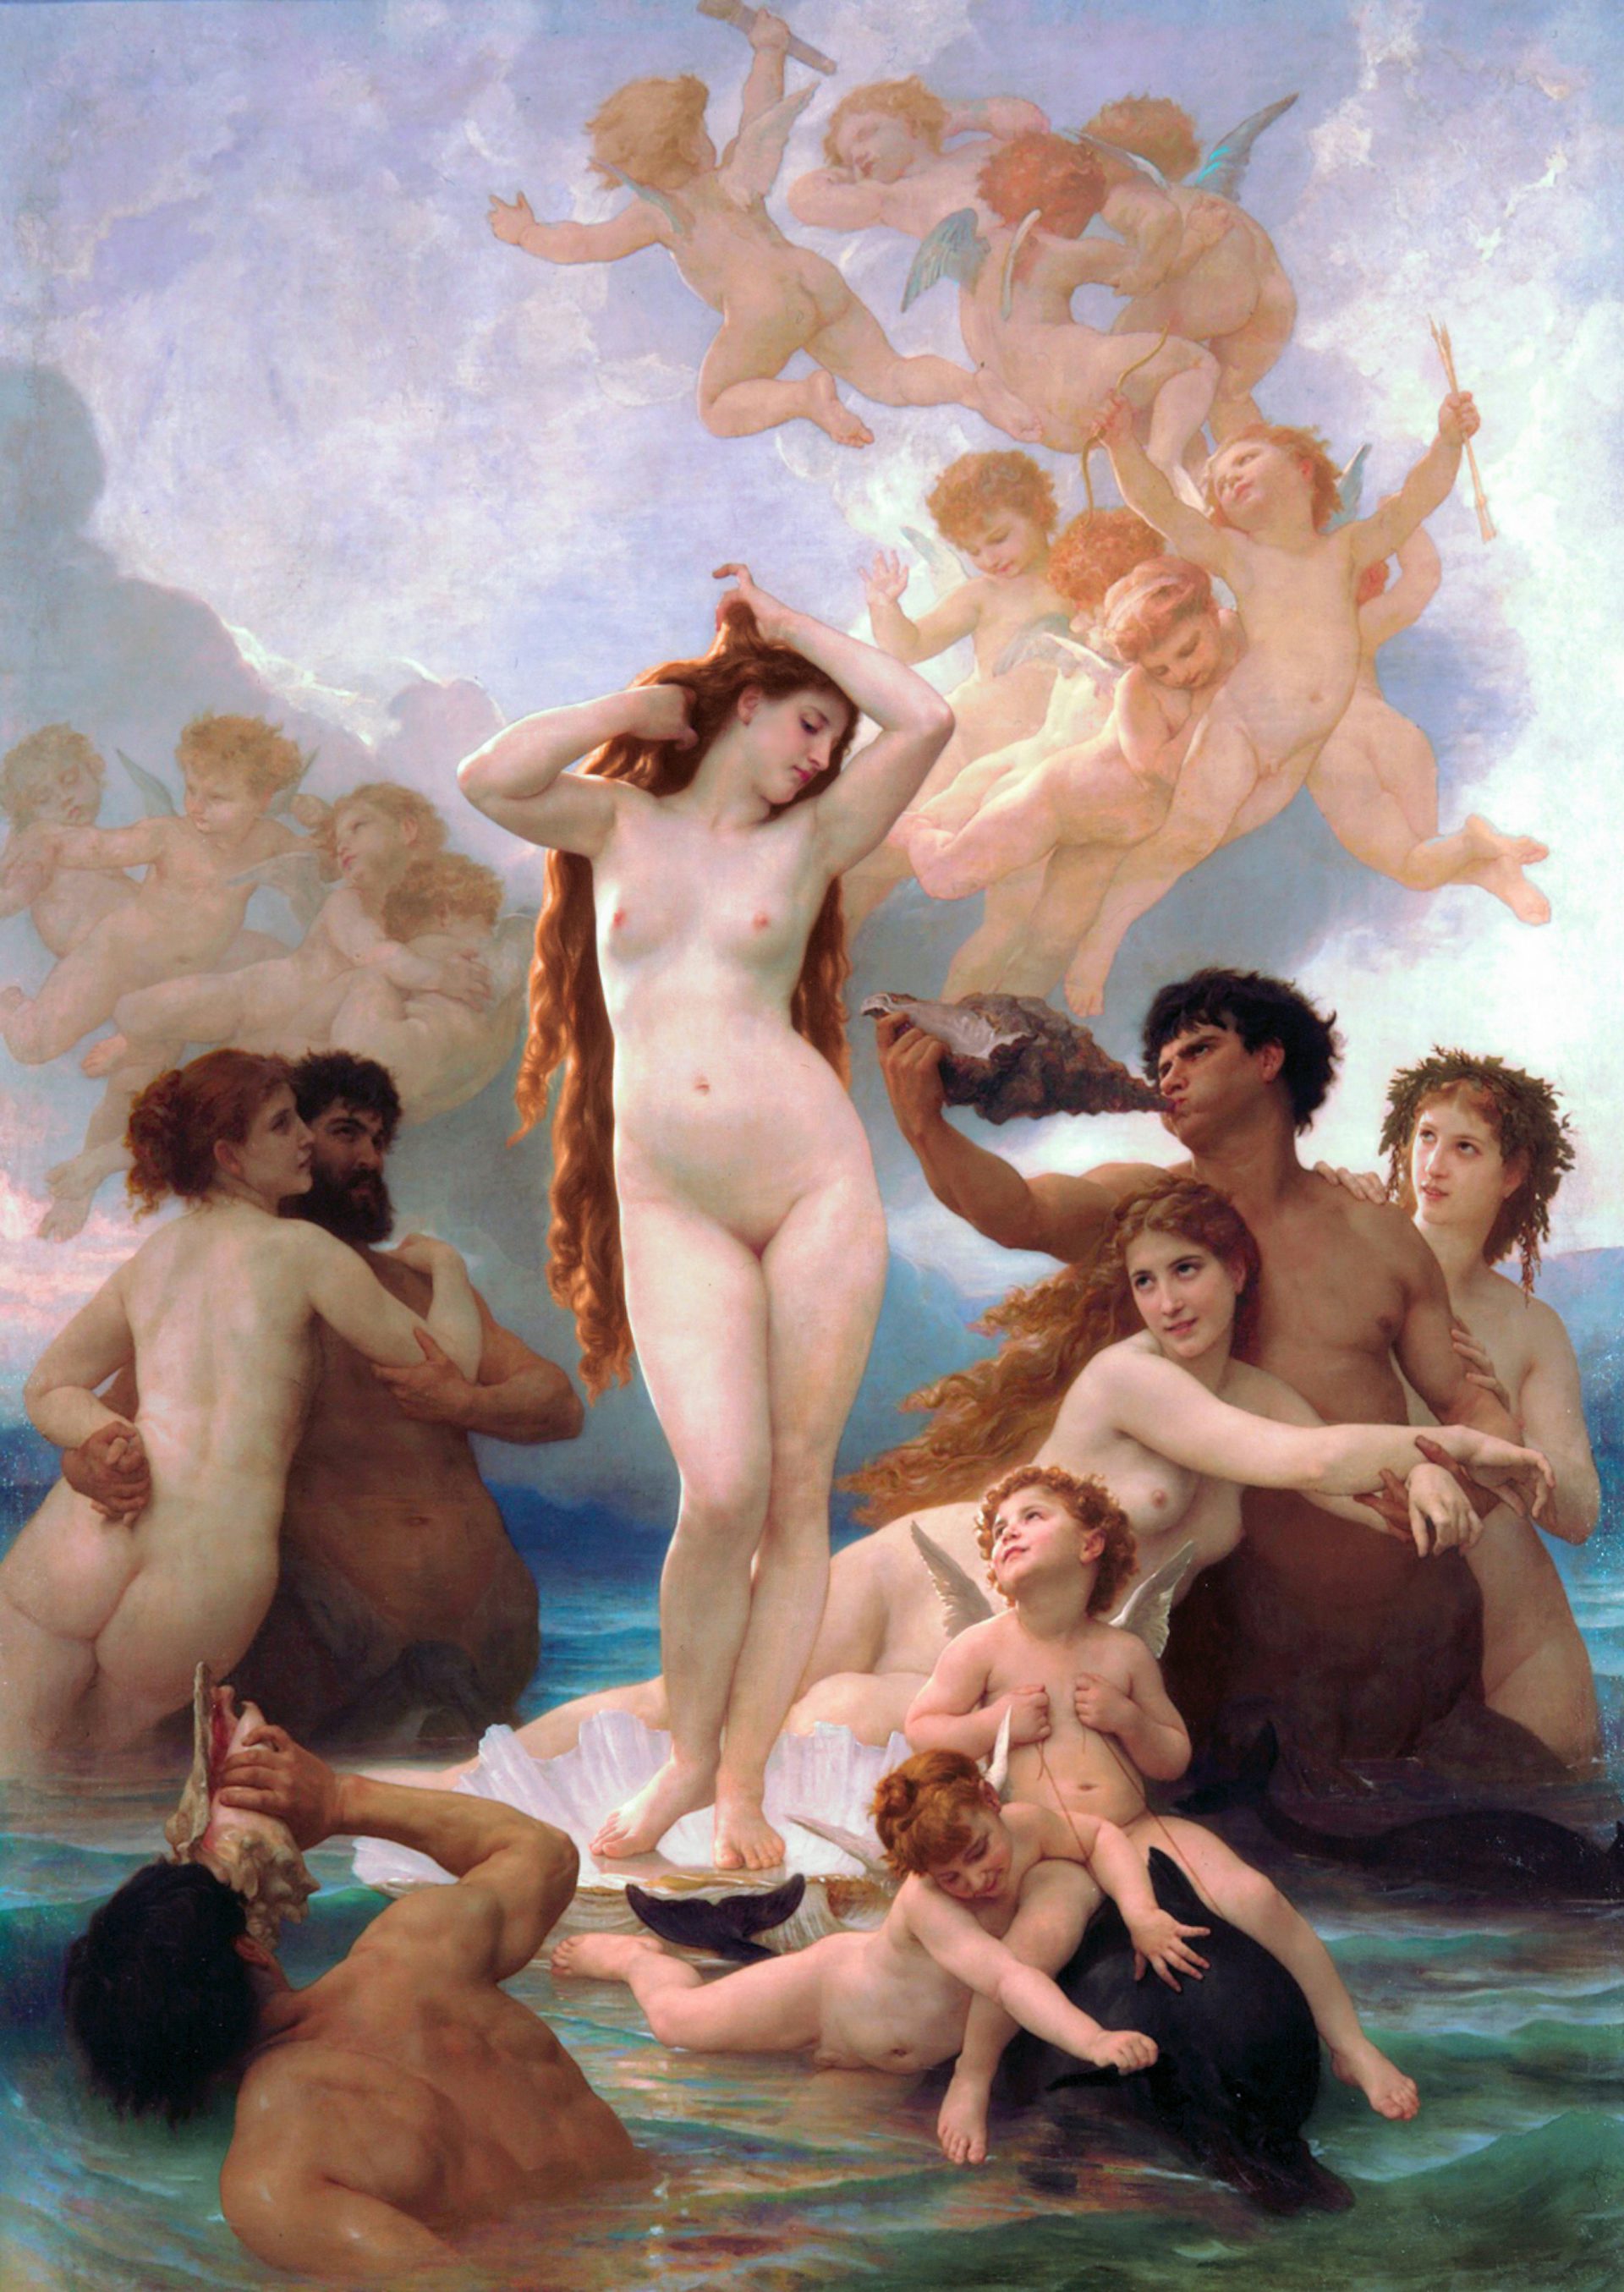 The Birth of Venus by William-Adolphe Bouguereau